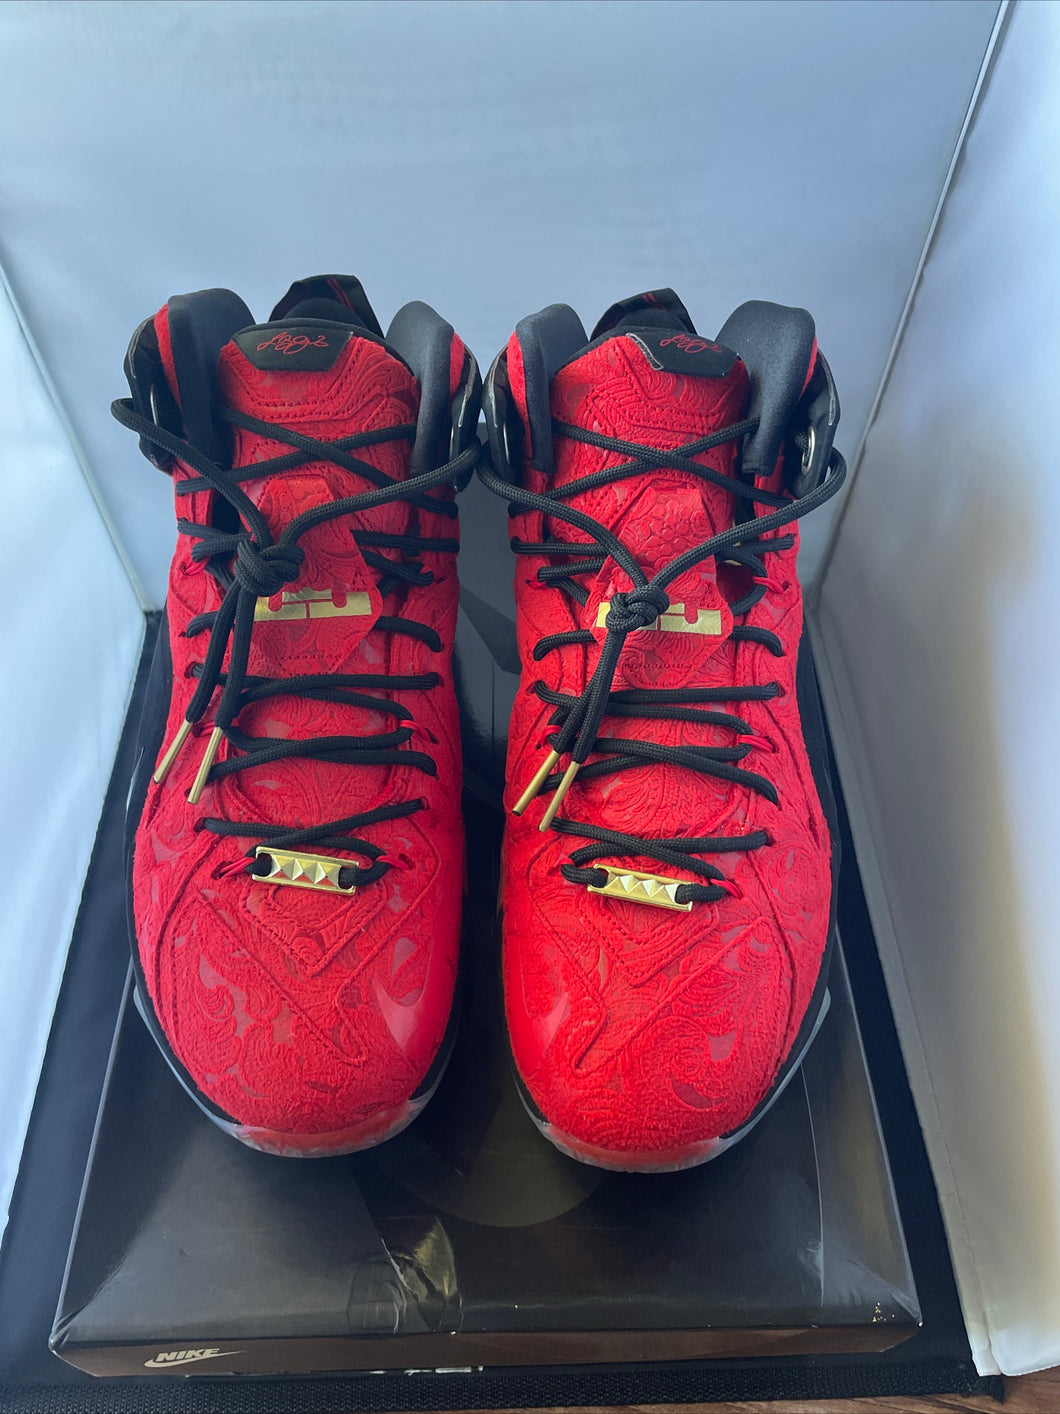 LeBron XII EXT size 12 *preowned*